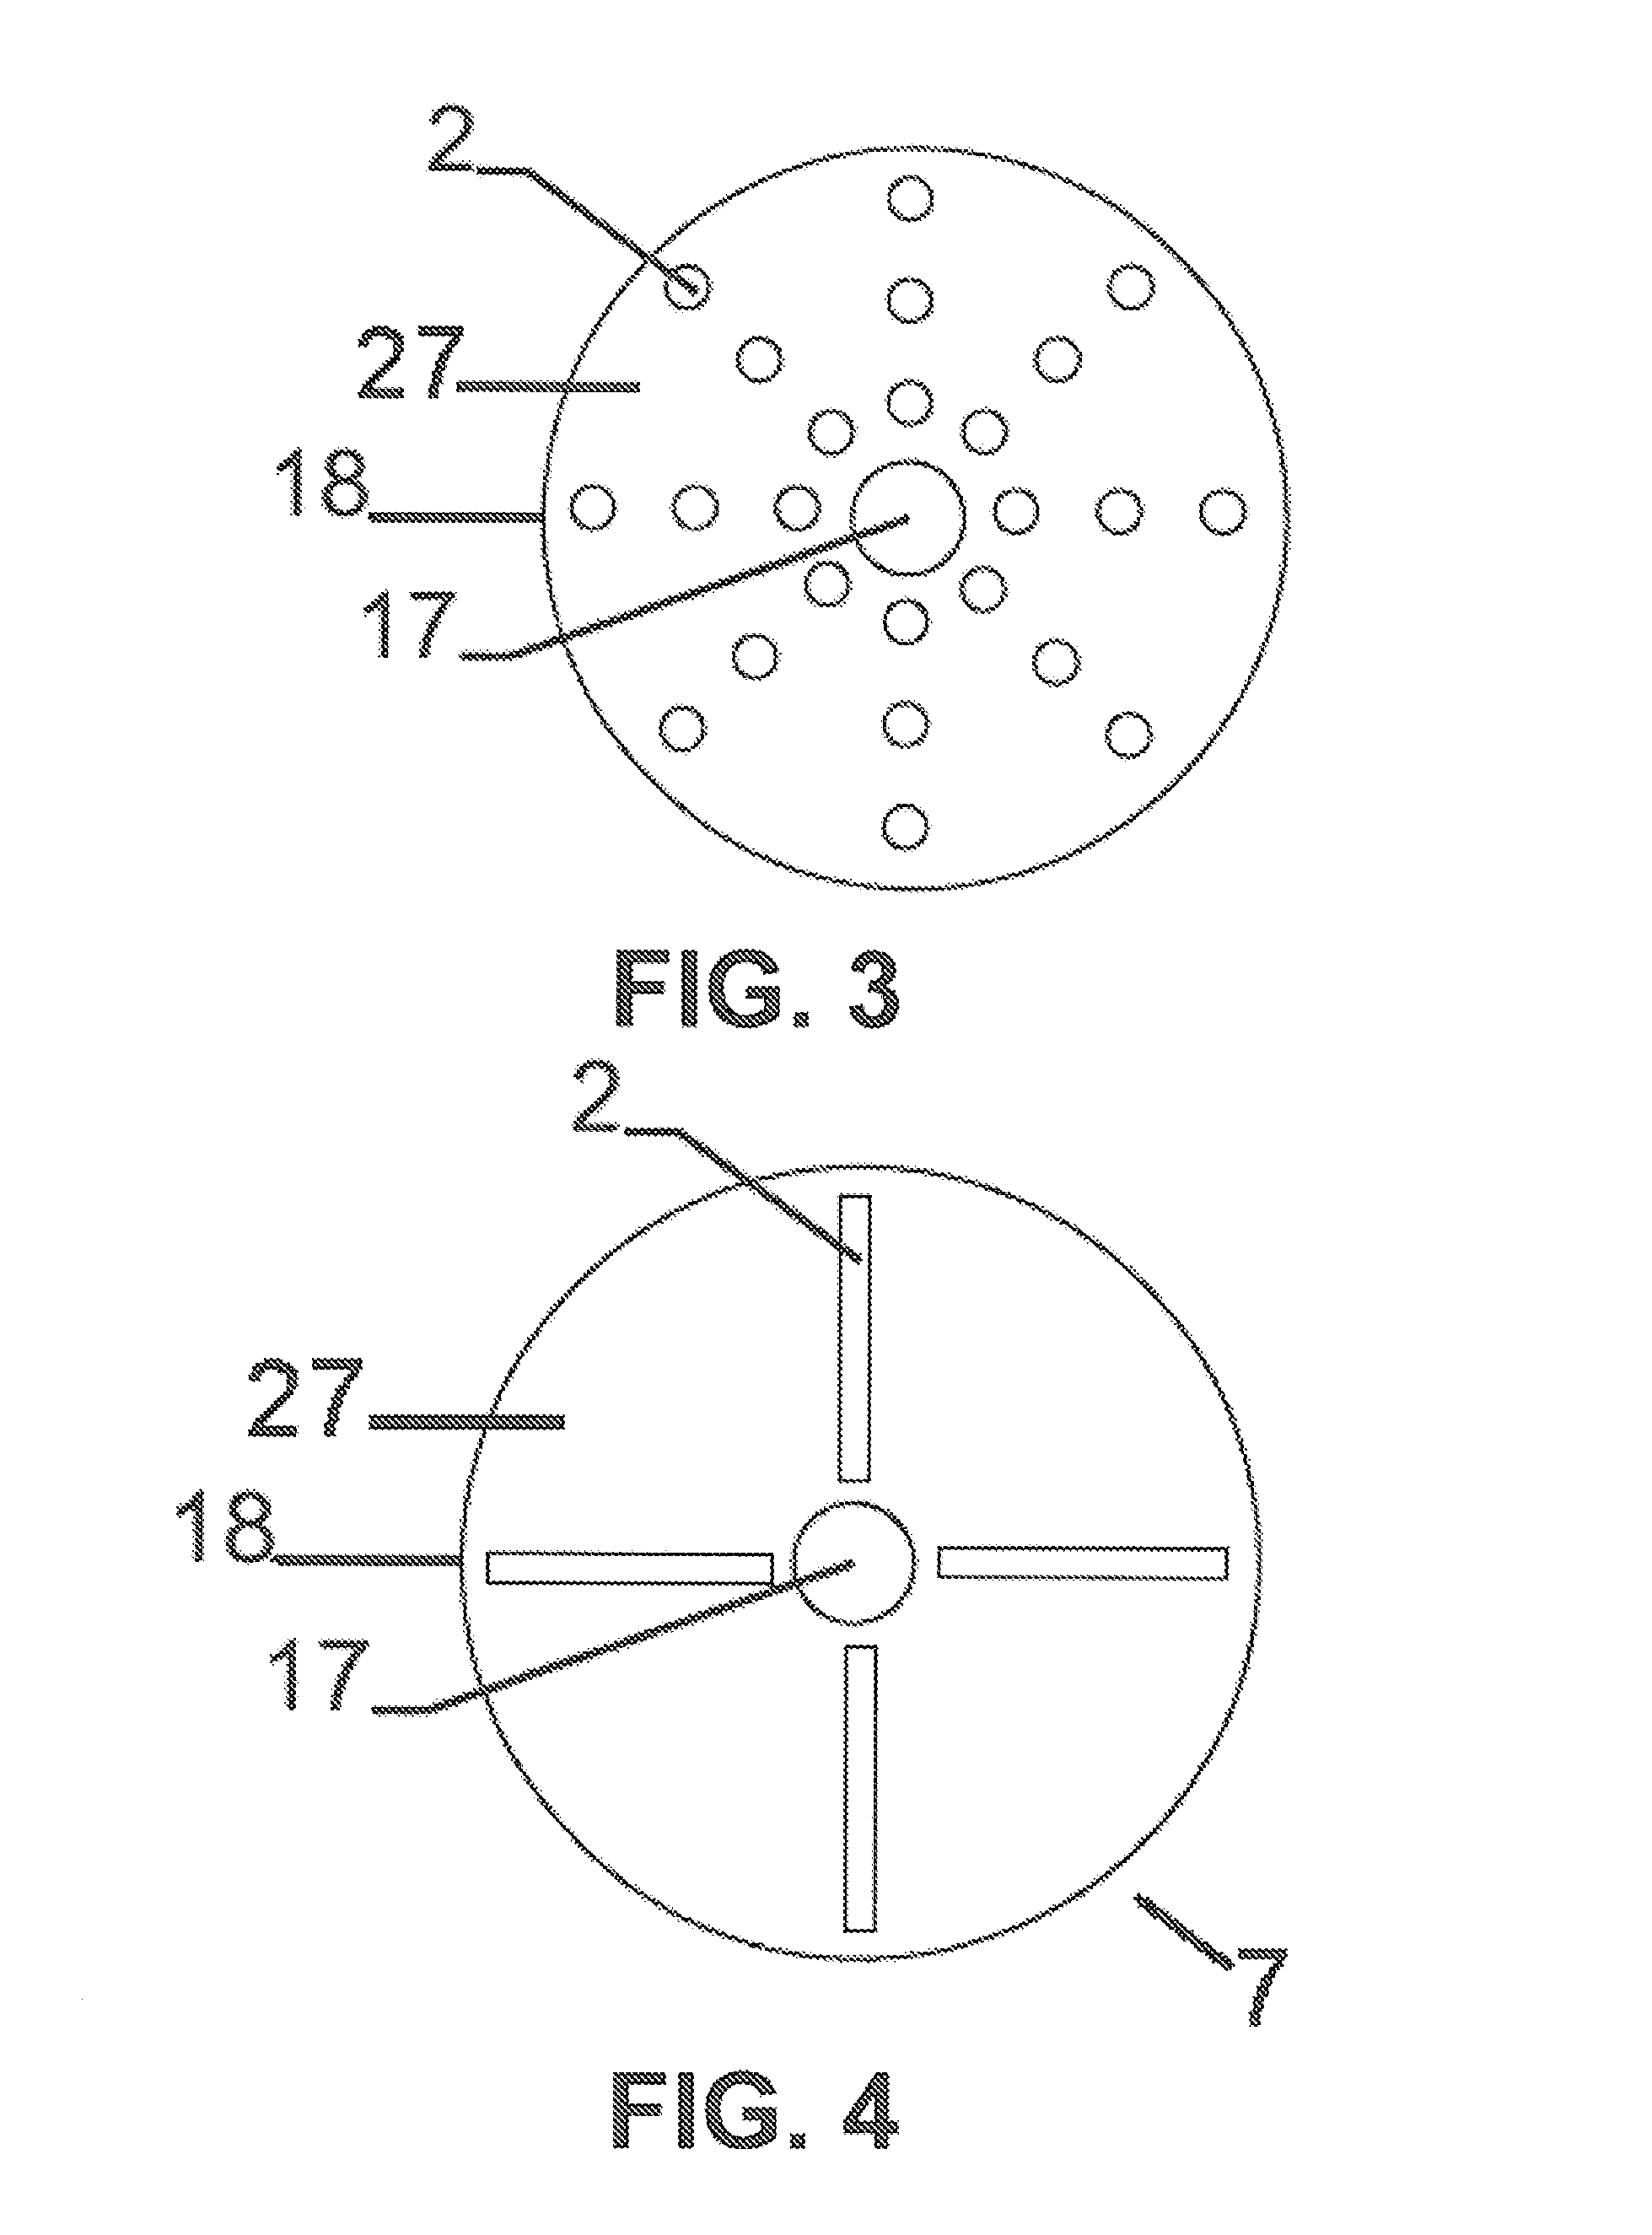 Apparatus and Methods for Cell Culture